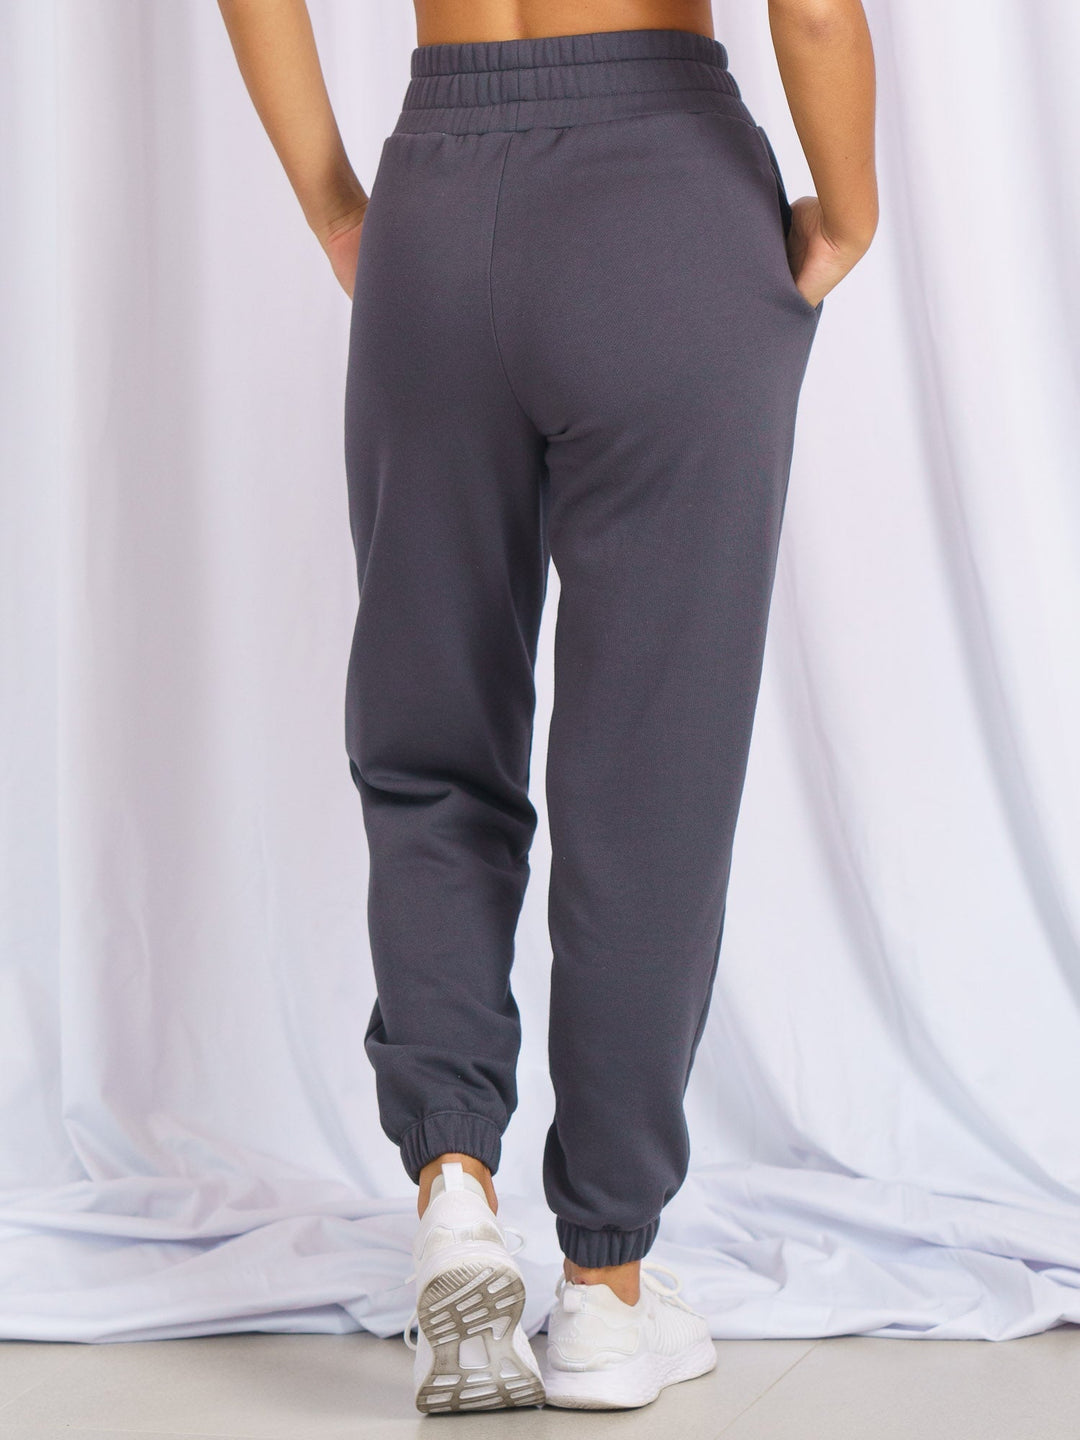 Revive Trackpants - Charcoal Clothing Ryderwear 